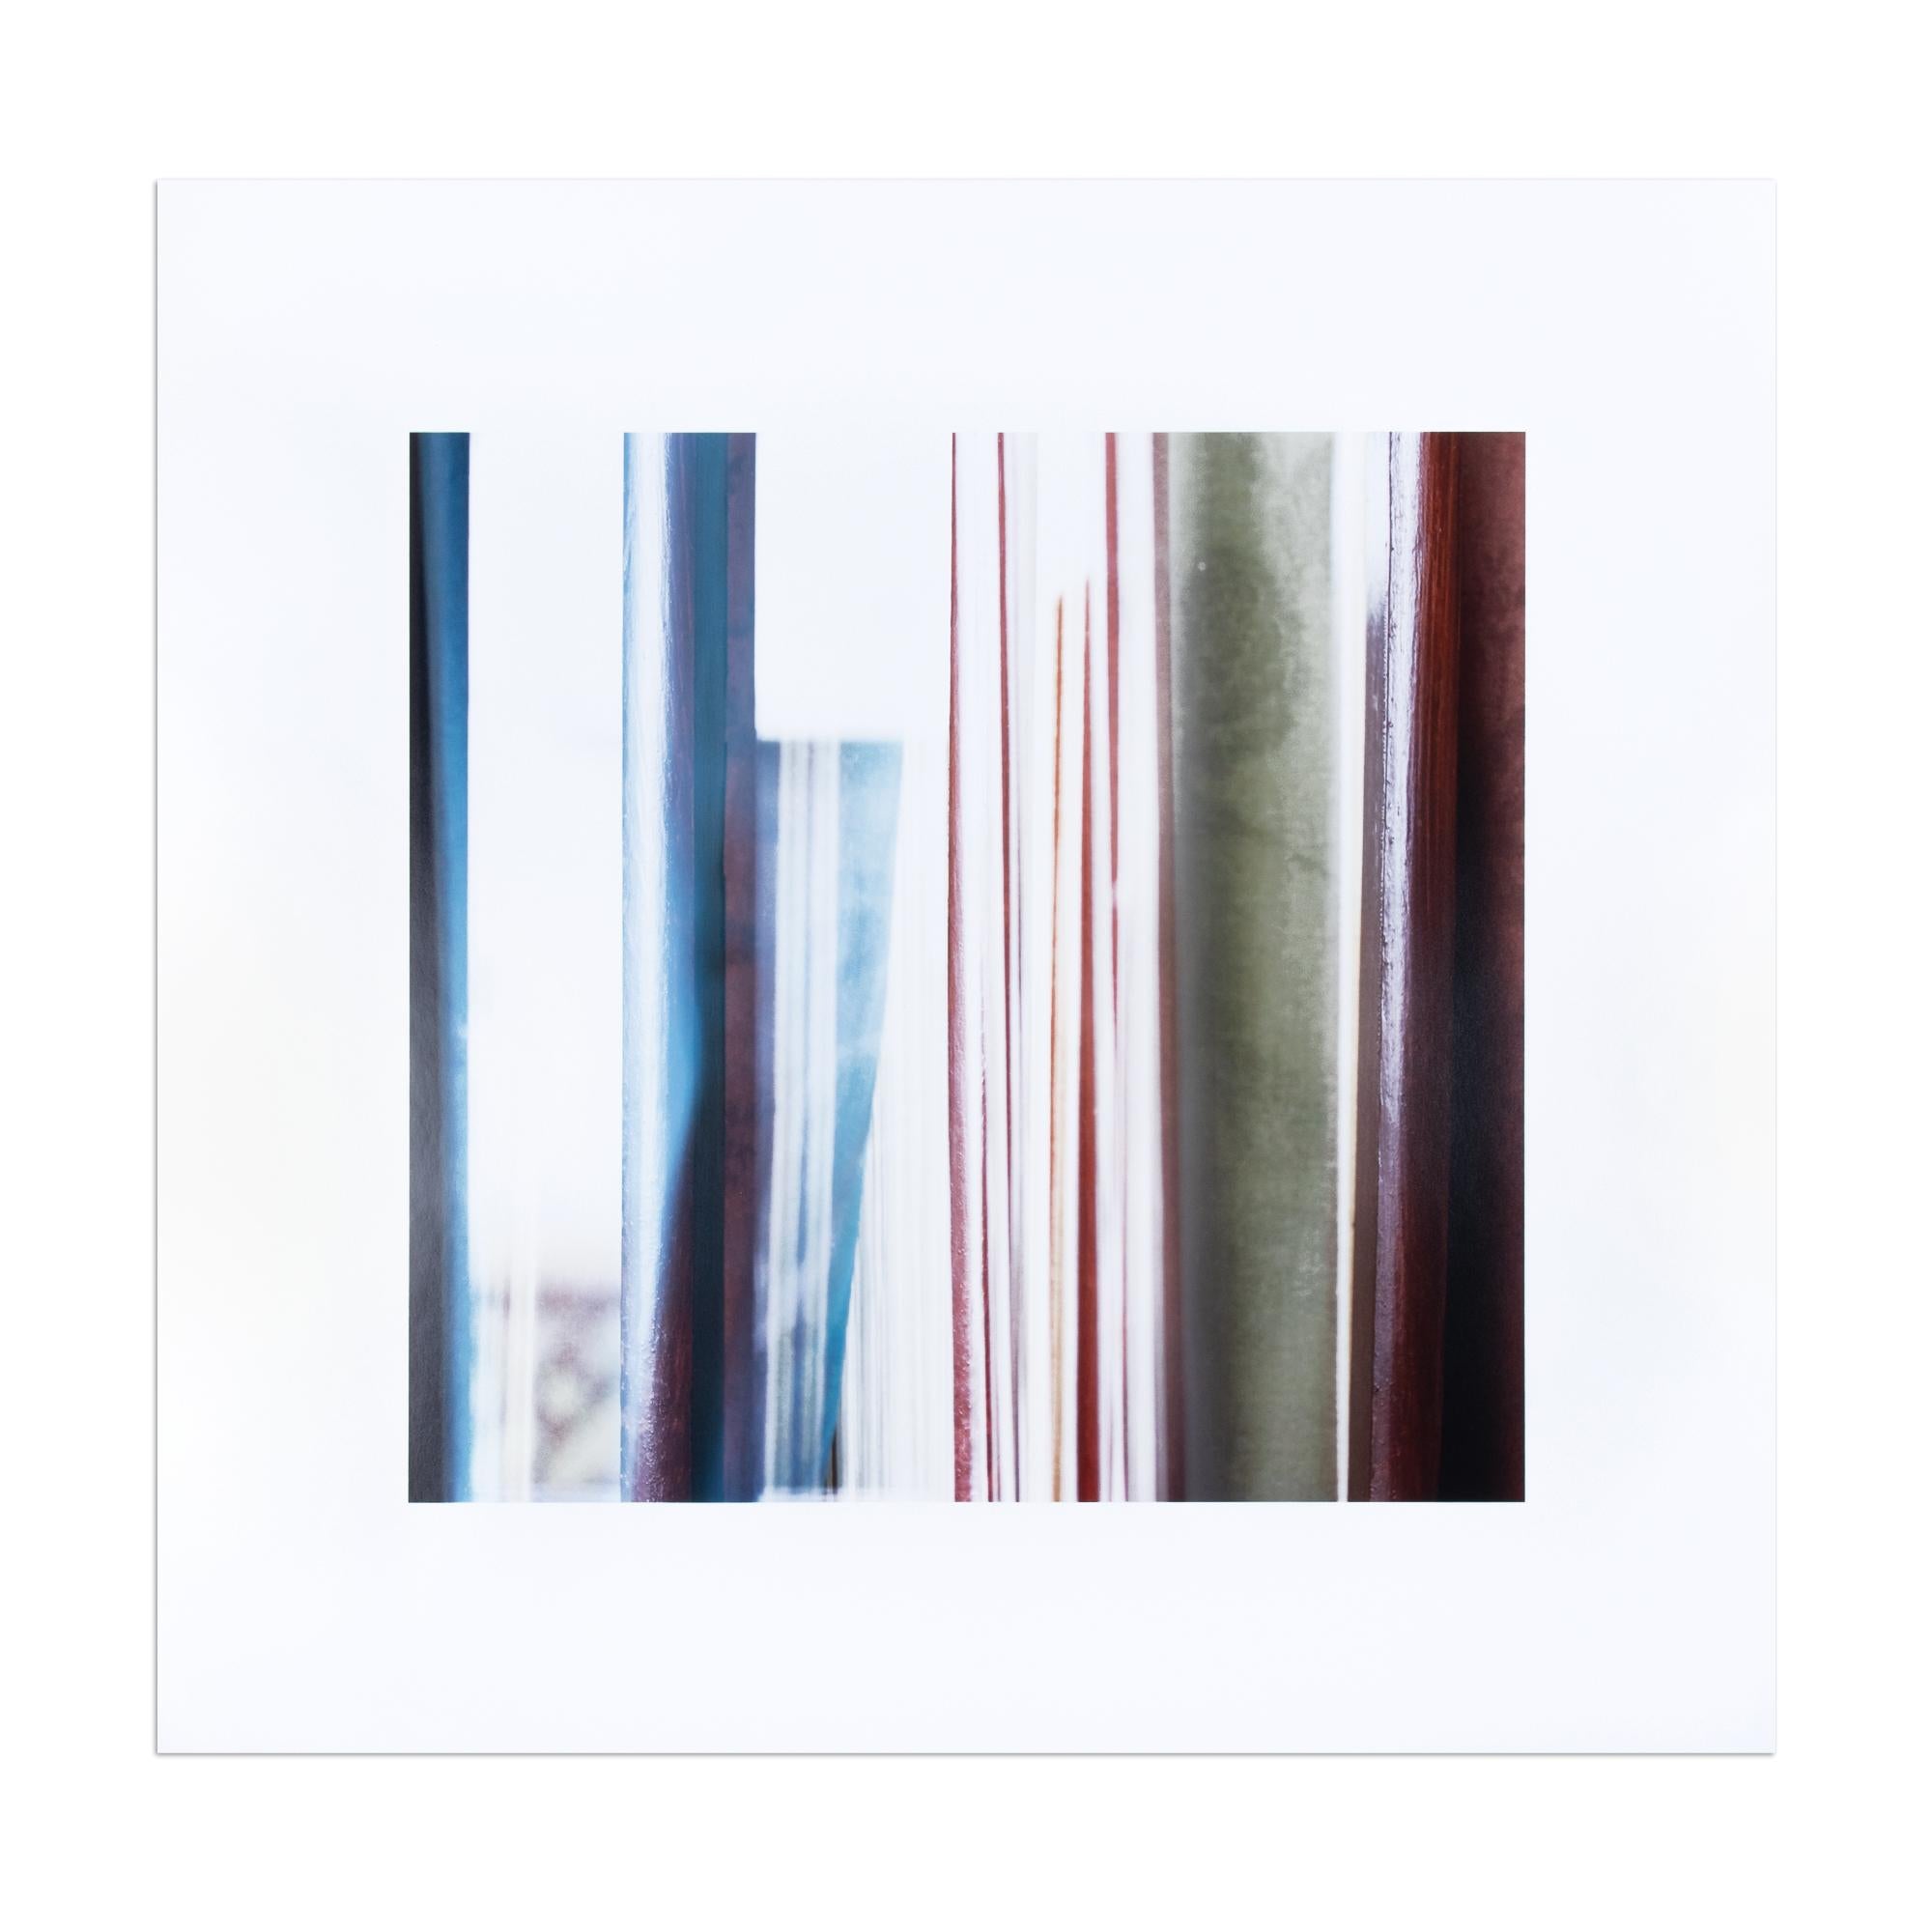 Candida Höfer (German, born 1944)
Colored Wood, 2017
Medium: C-Print
Dimensions: 56 × 57.7 cm (22 × 22 7/10 in)
Edition of 100: Hand-signed and numbered on verso
Condtion: Mint